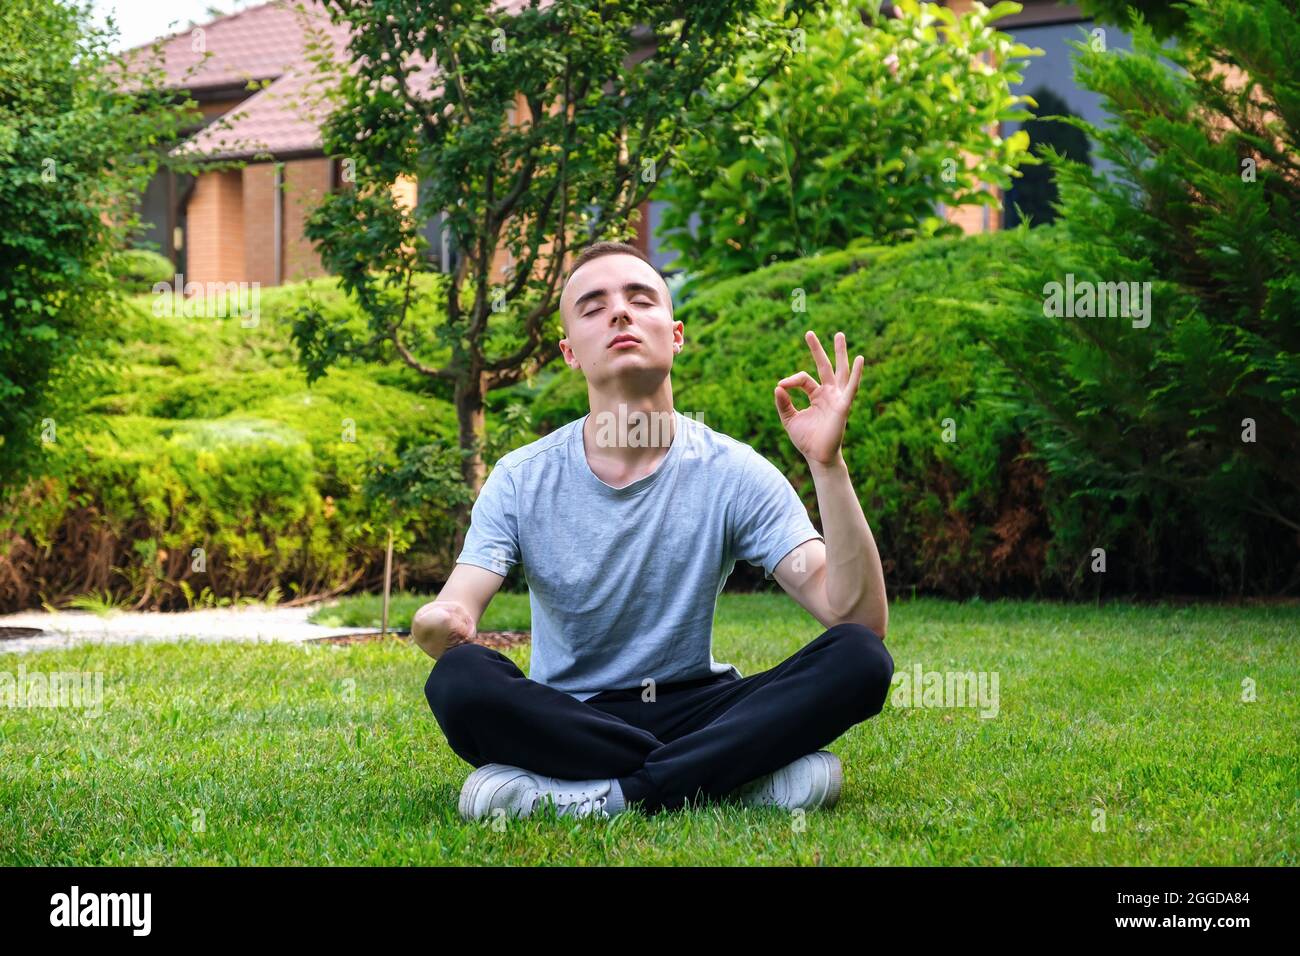 Young man with disability meditating yoga outdoors Stock Photo